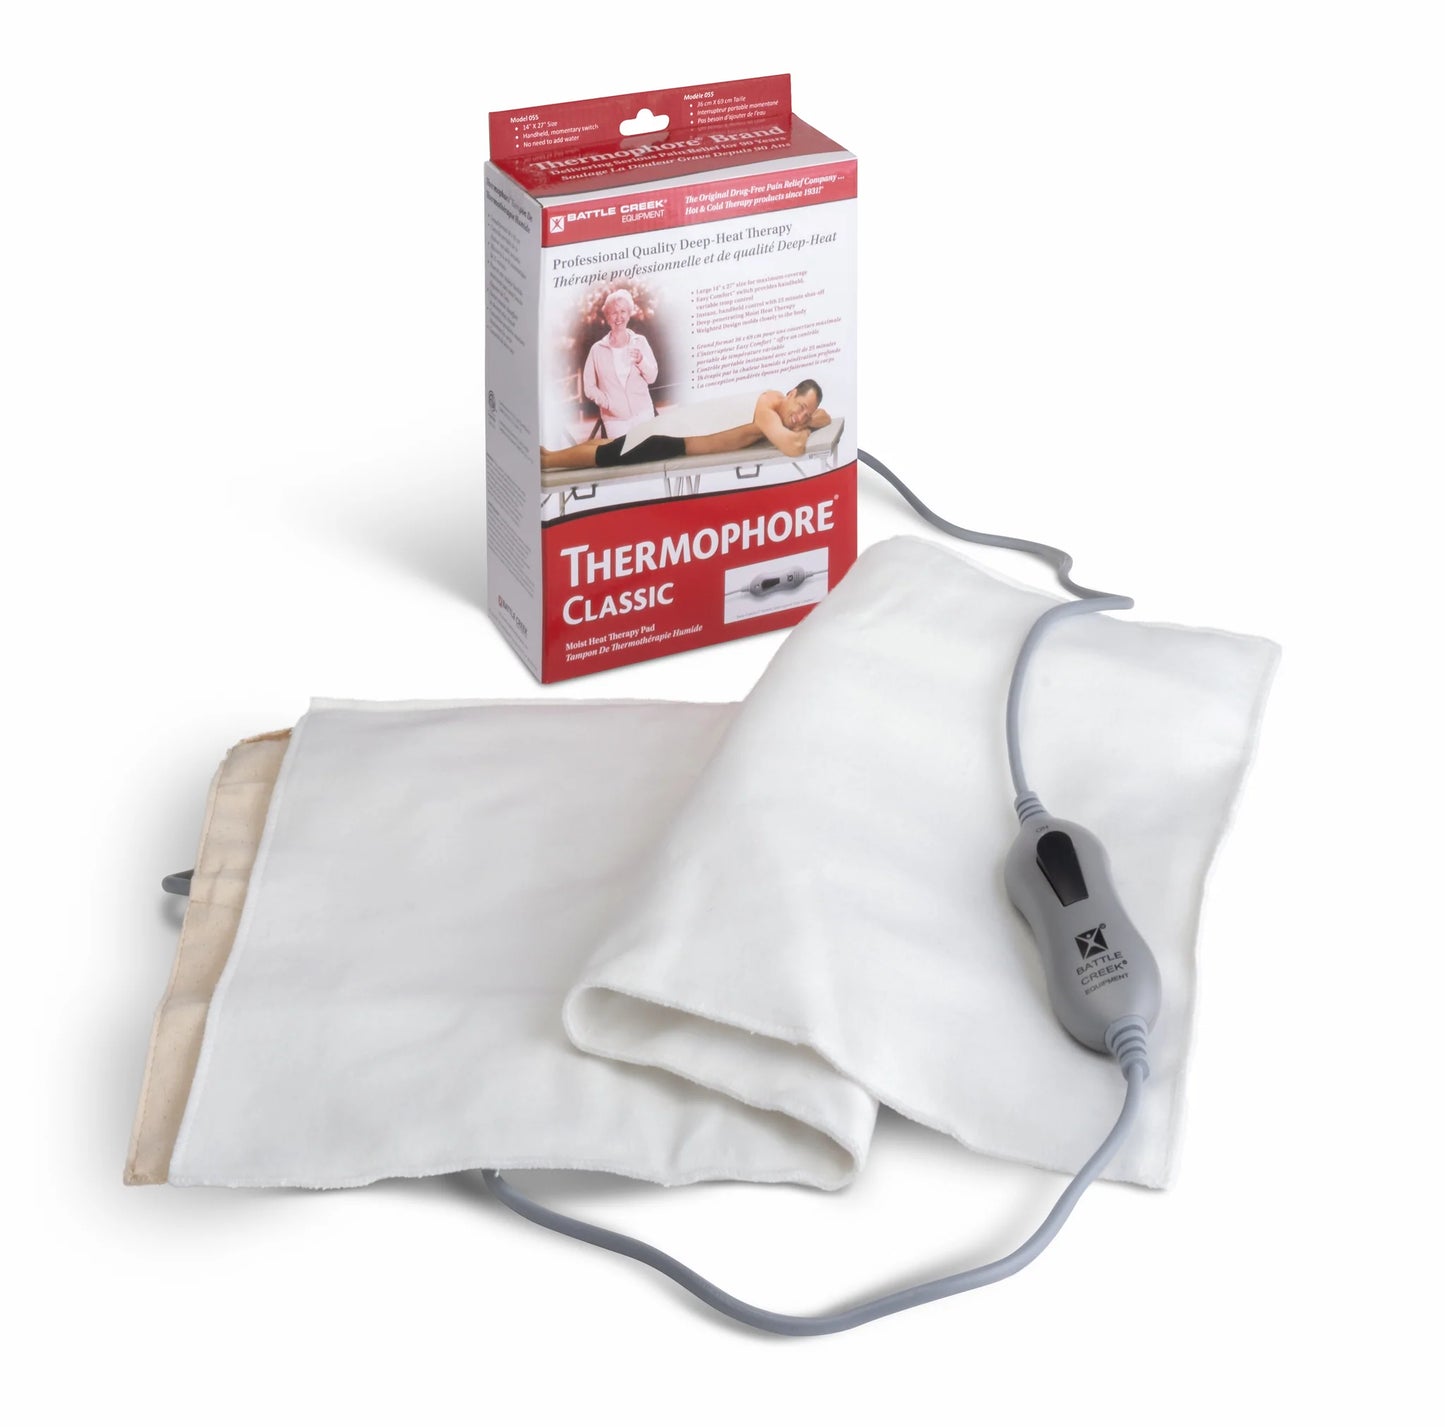 Thermophore Classic Moist Heating Pad - Canada